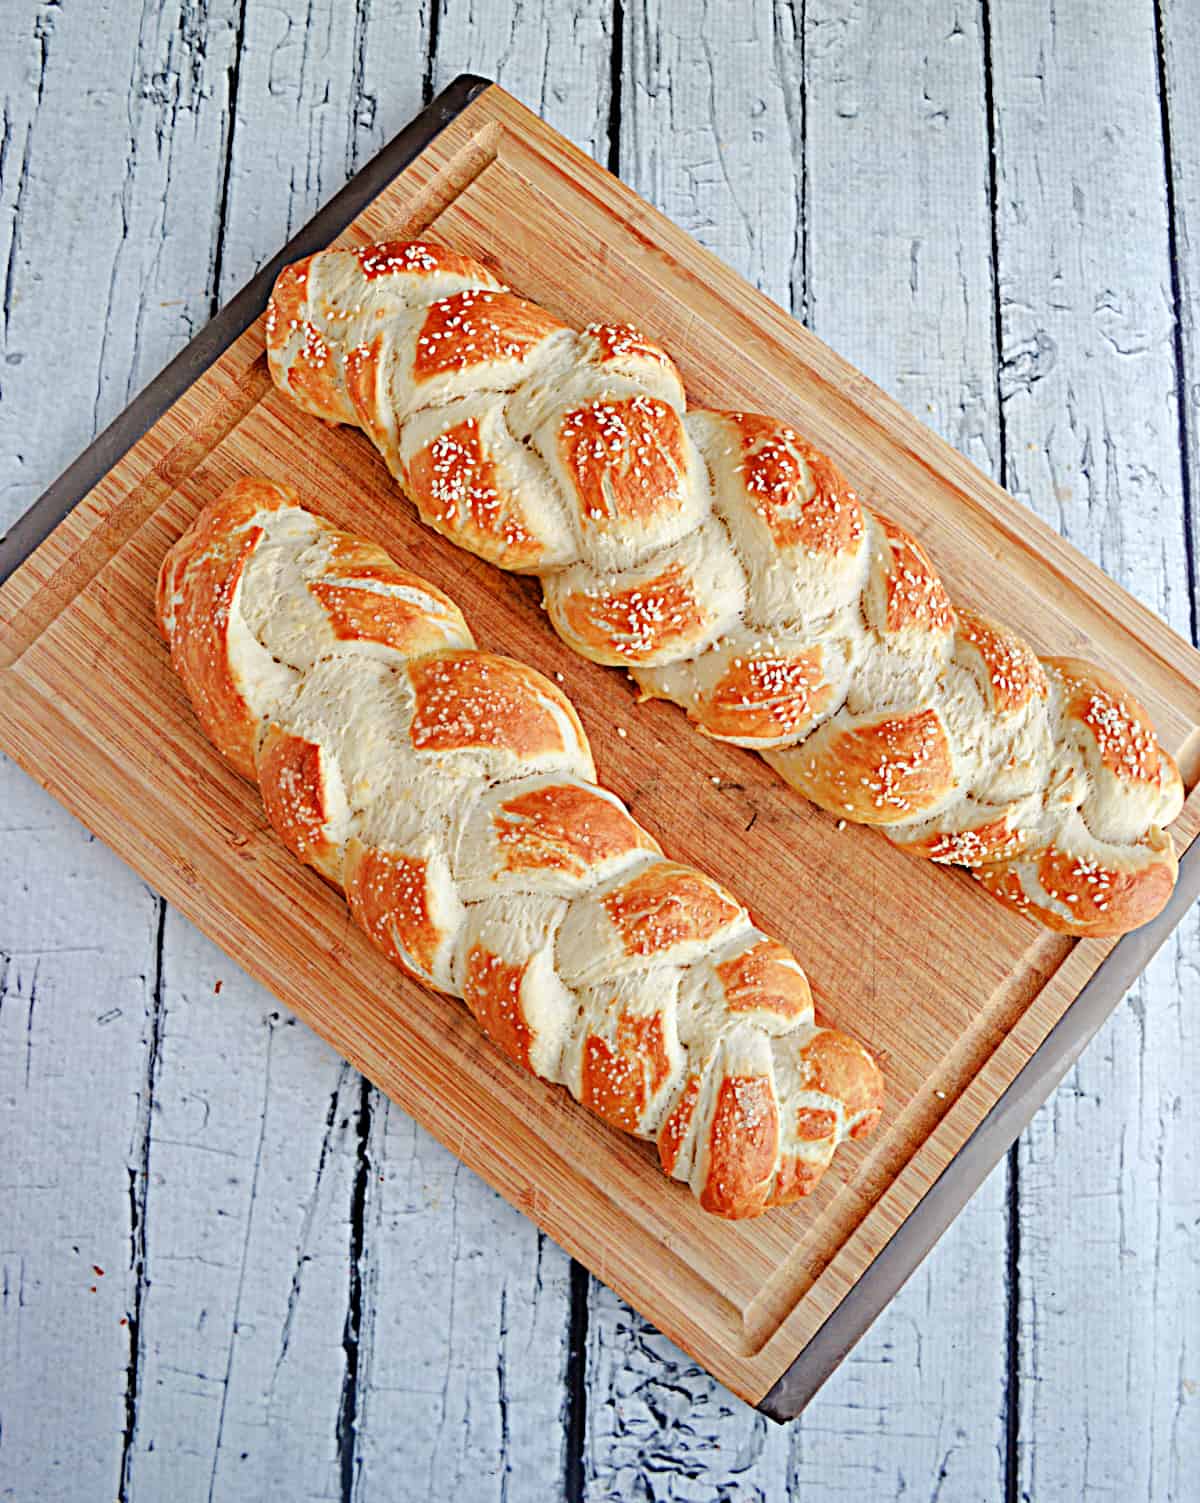 Two baked Vegan Challah braided breads